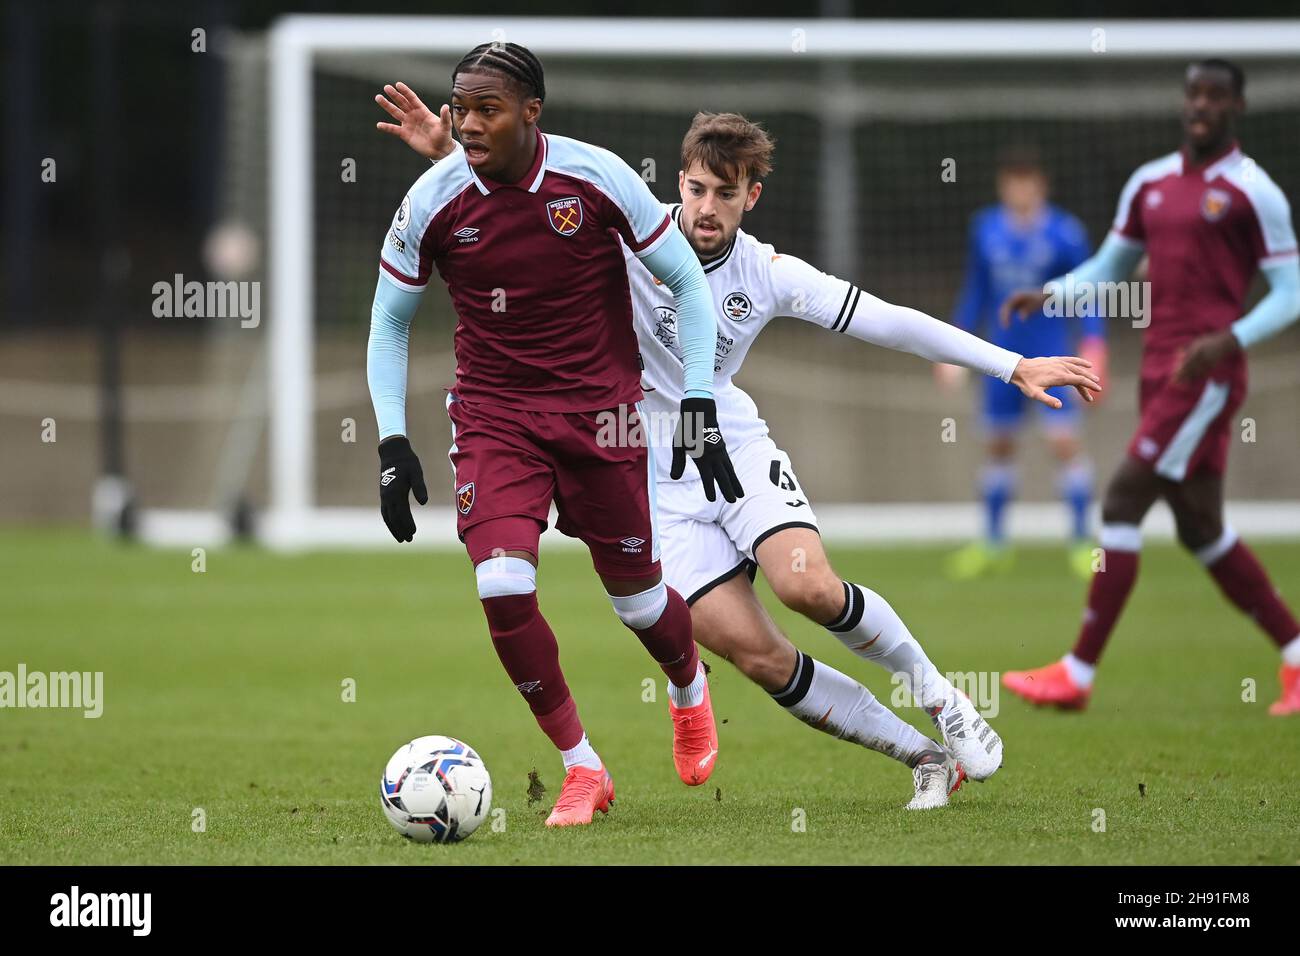 Thierry Nevers #11 of West Ham U23's under pressure from Ben Margetson #6 of Swansea City U23's Stock Photo